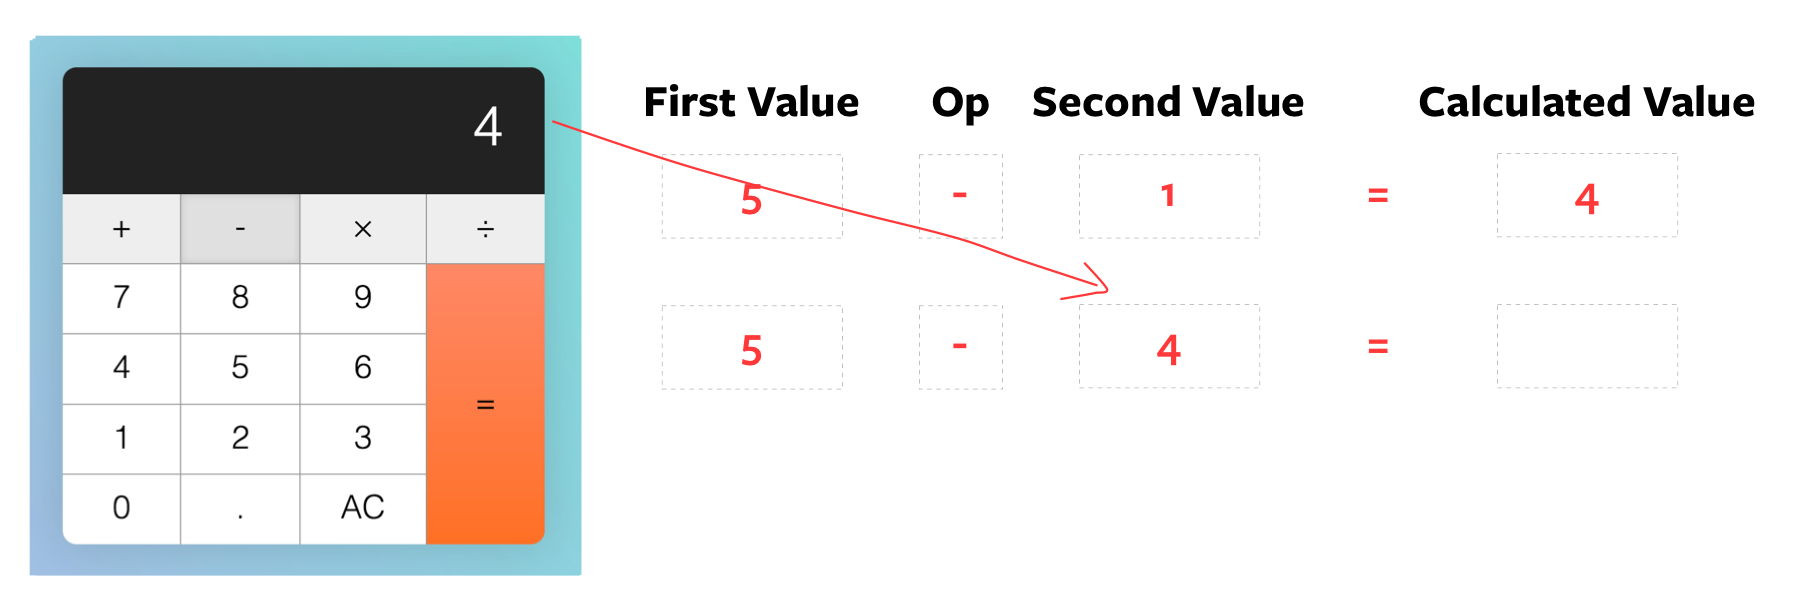 Once again, displayed num is set as the `secondValue` before the calculation